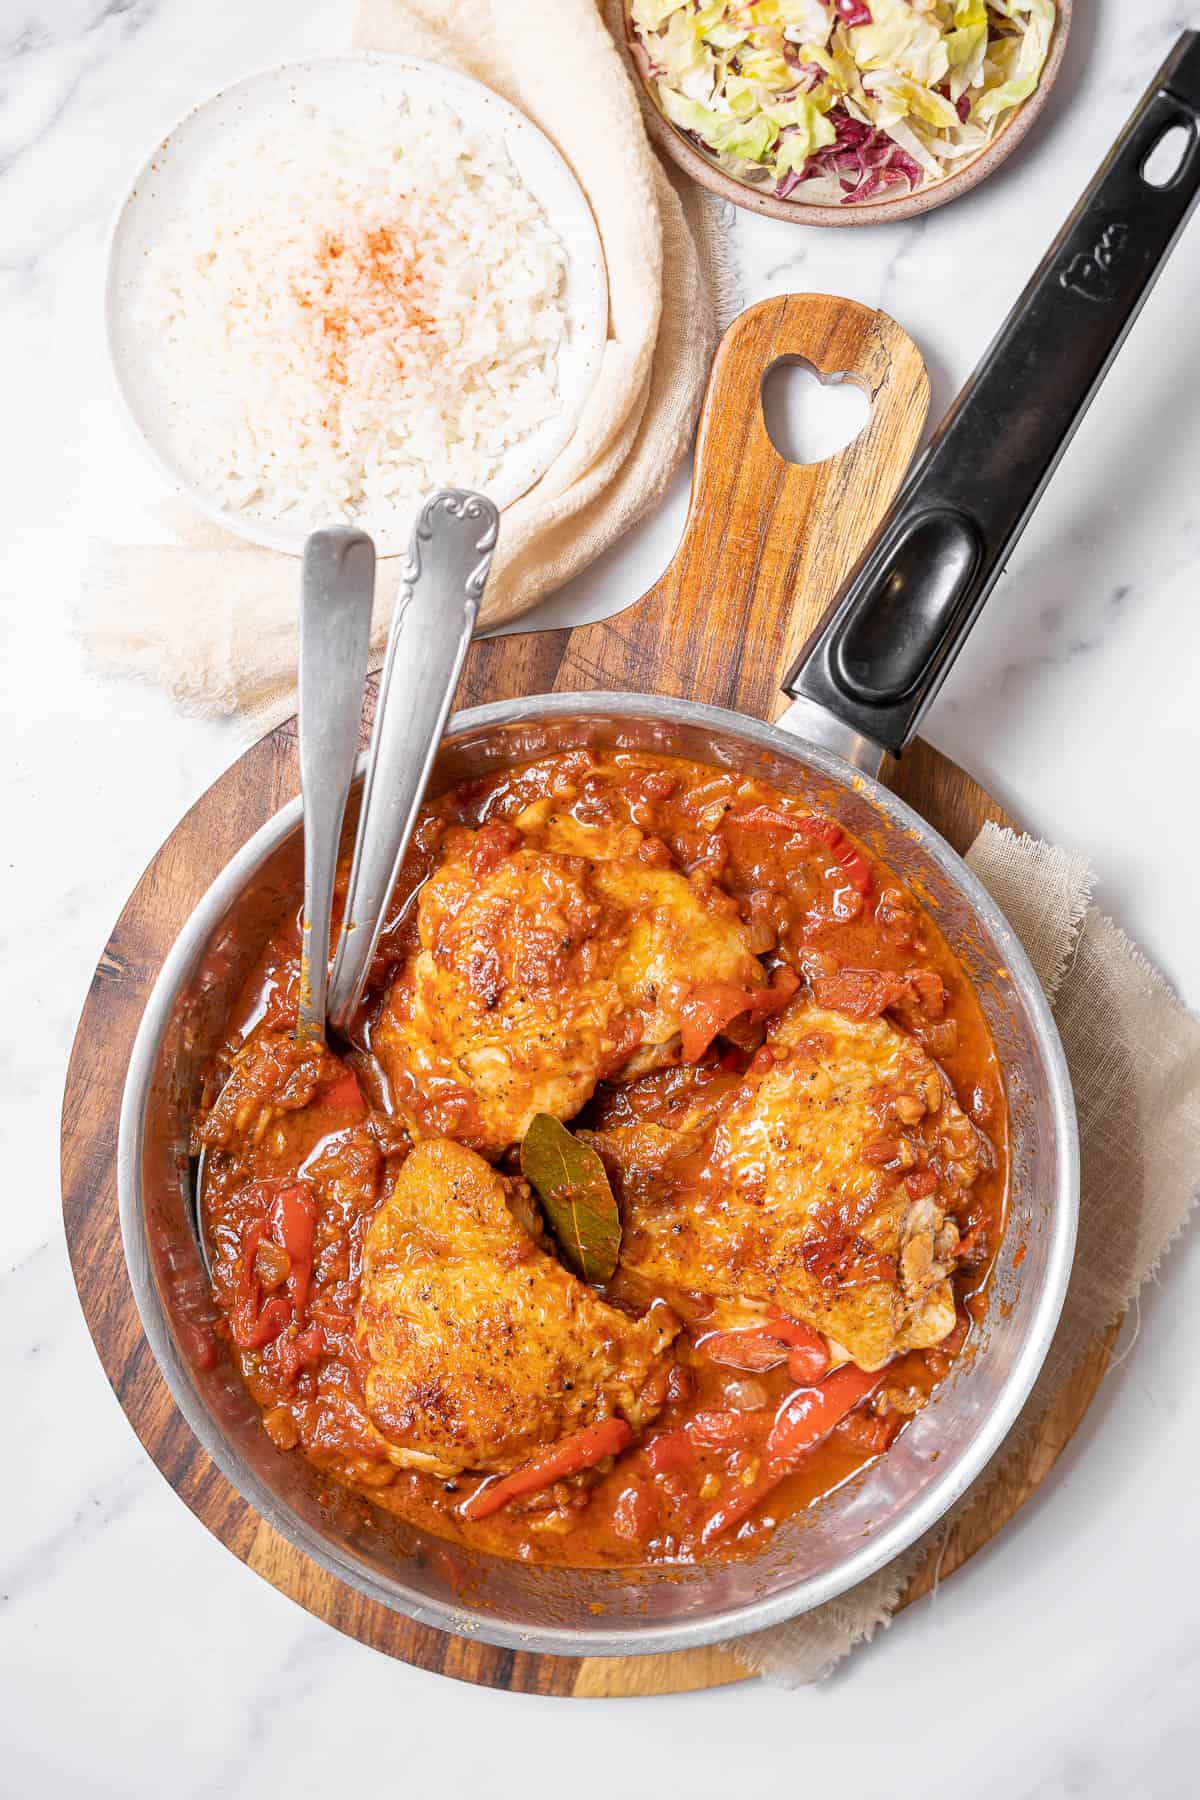 skillet of chicken chilindrón with rice and salad.